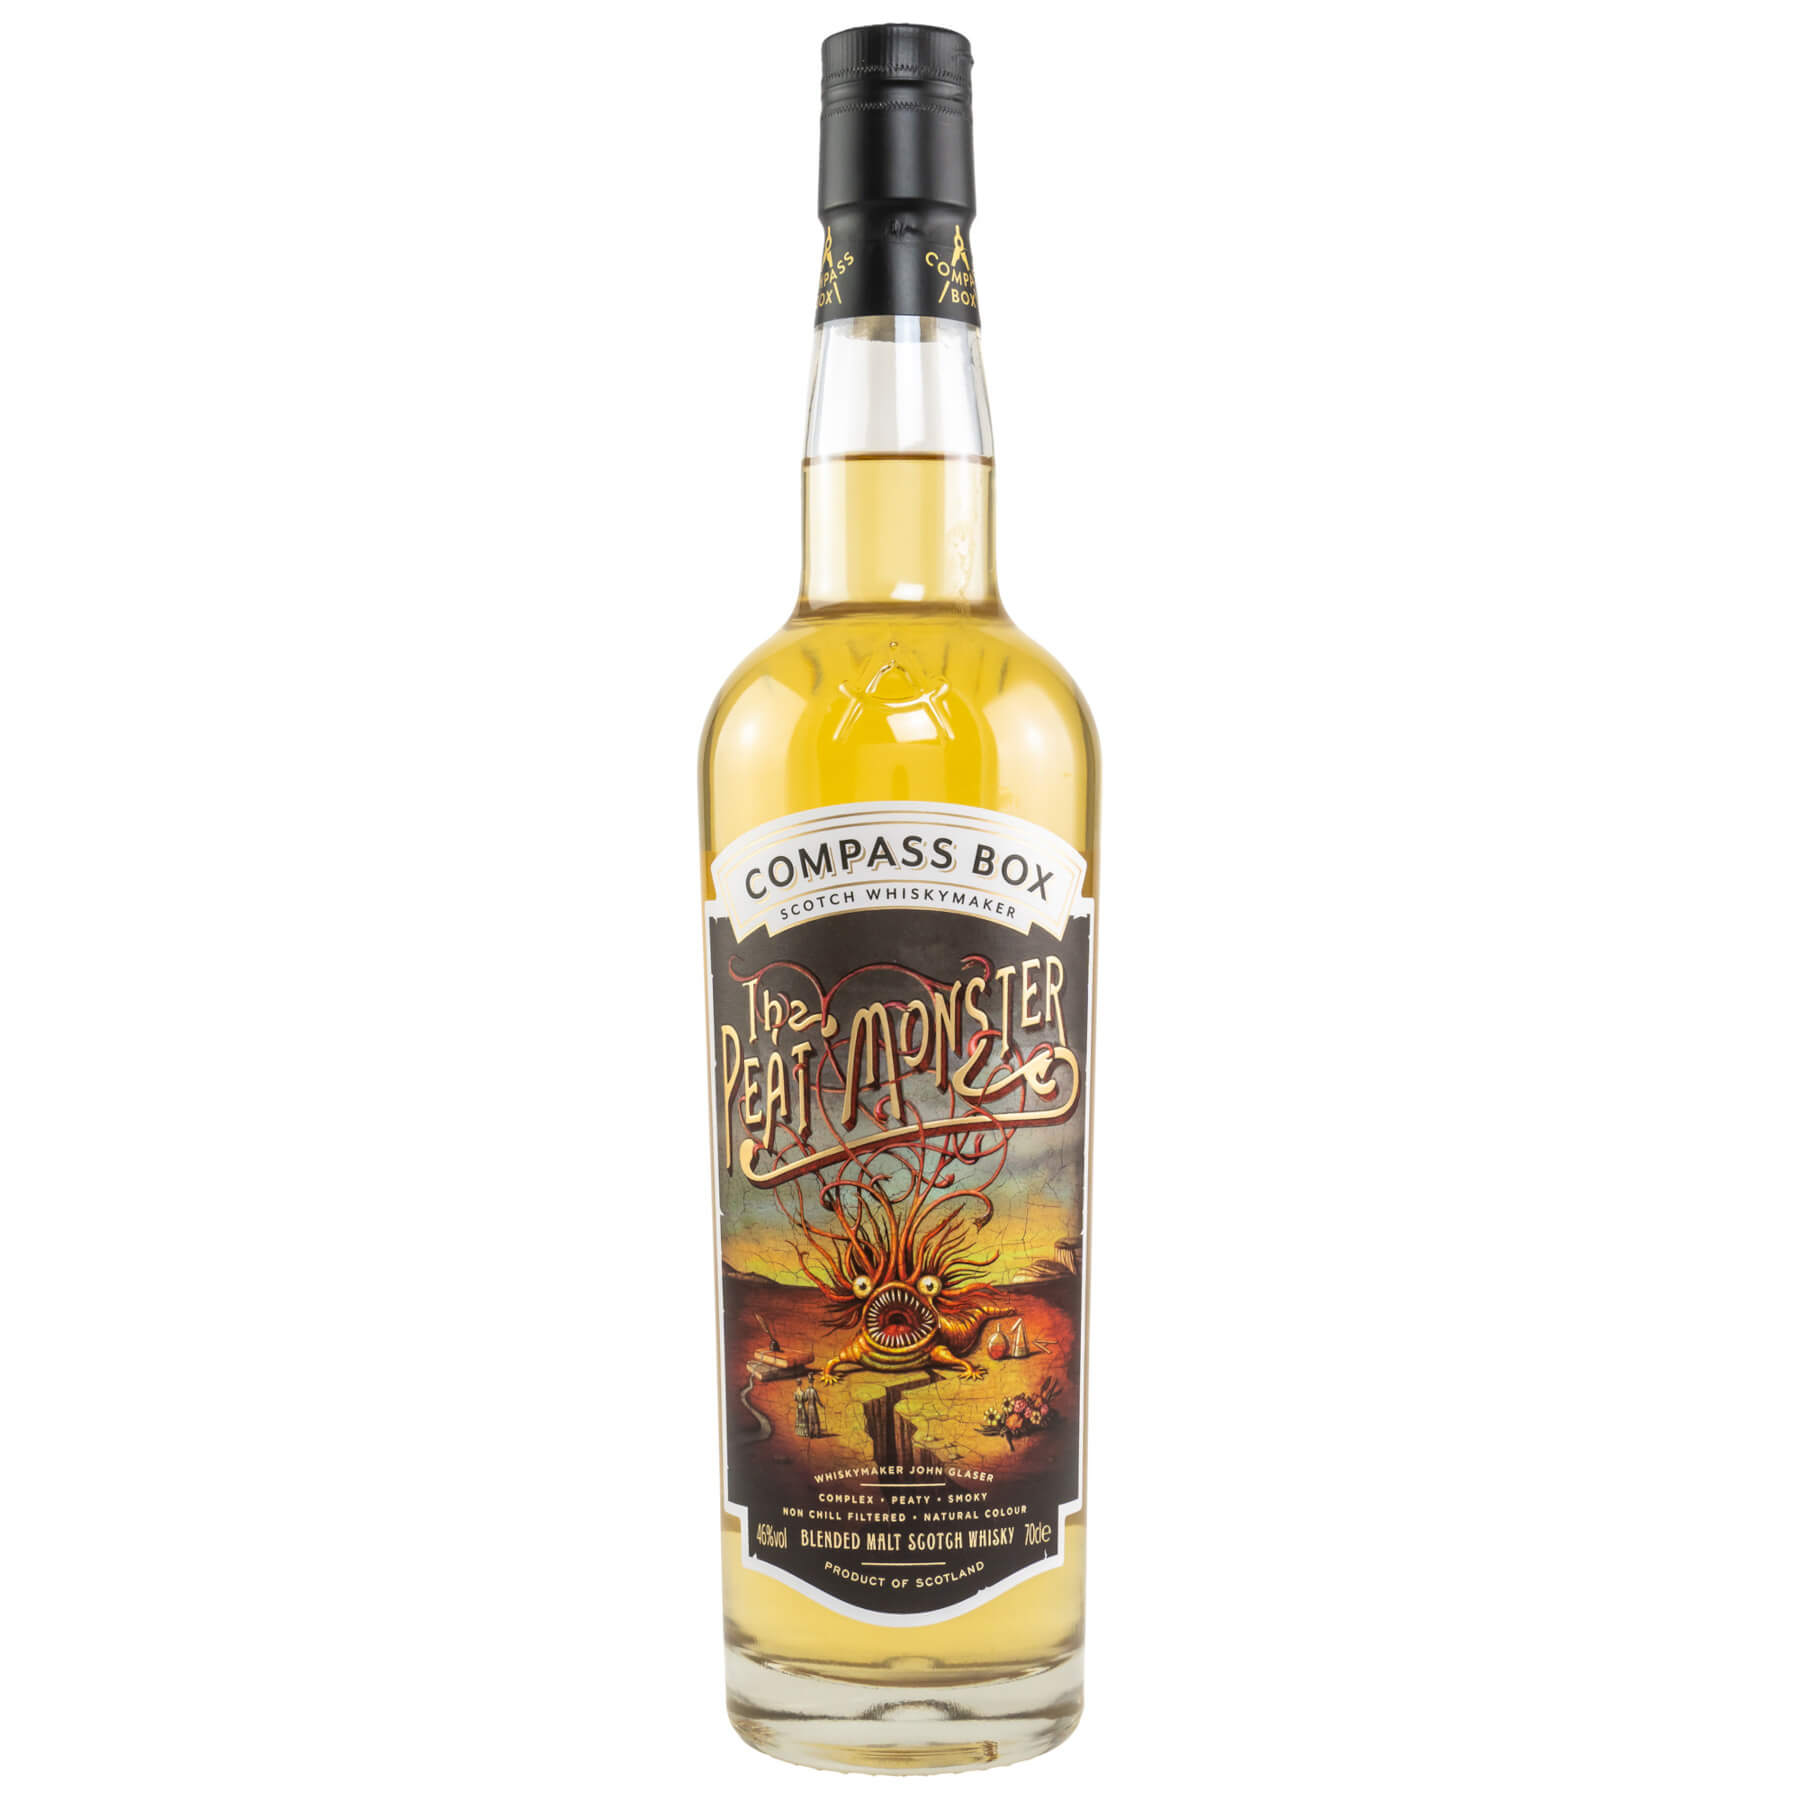 Flasche Peat Monster Blended Whisky